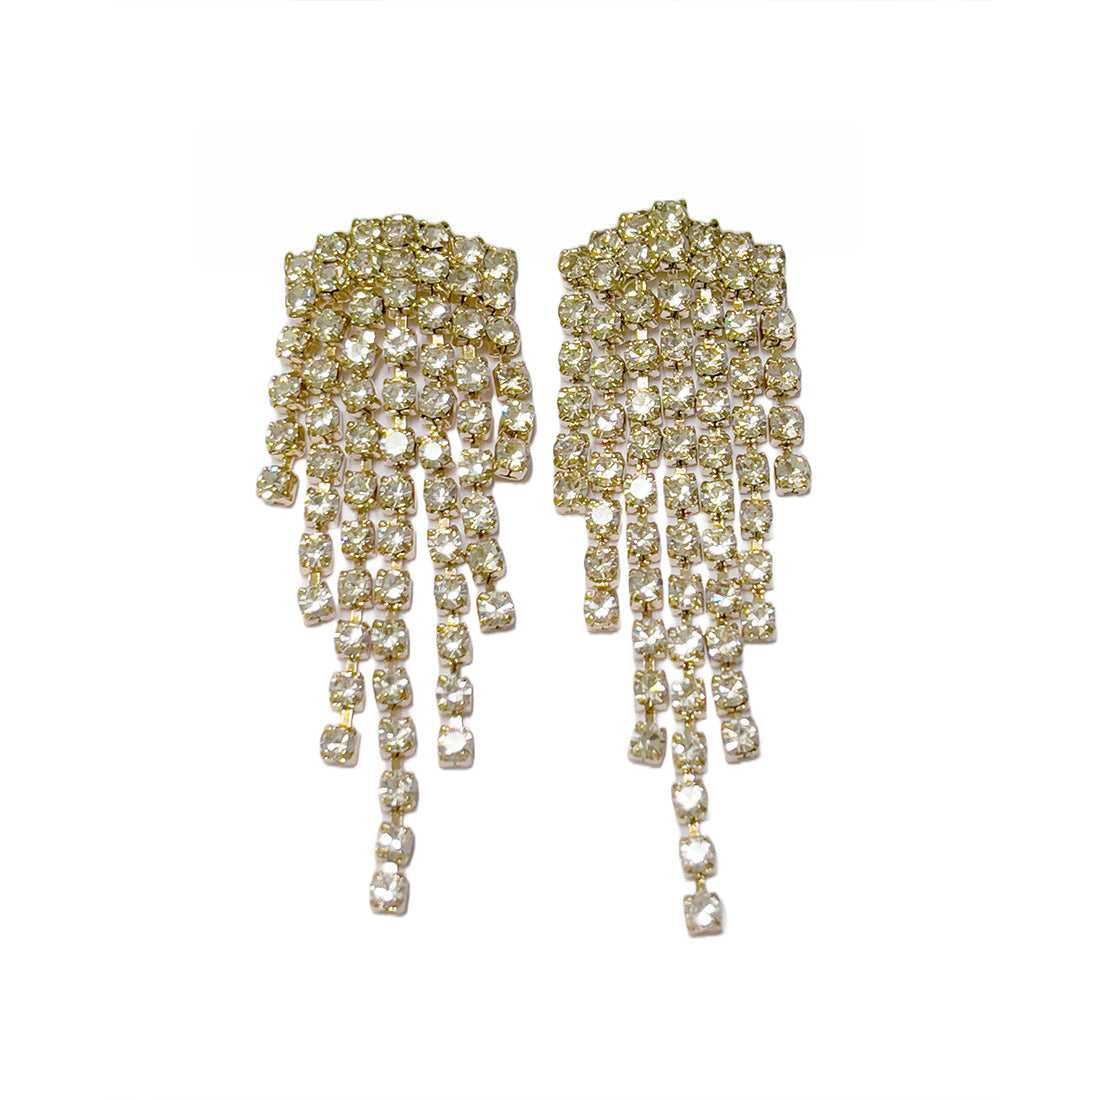 Ayesha Contemporary White Diamante Crystal Studded Gold-Toned Tassel Drop Earrings